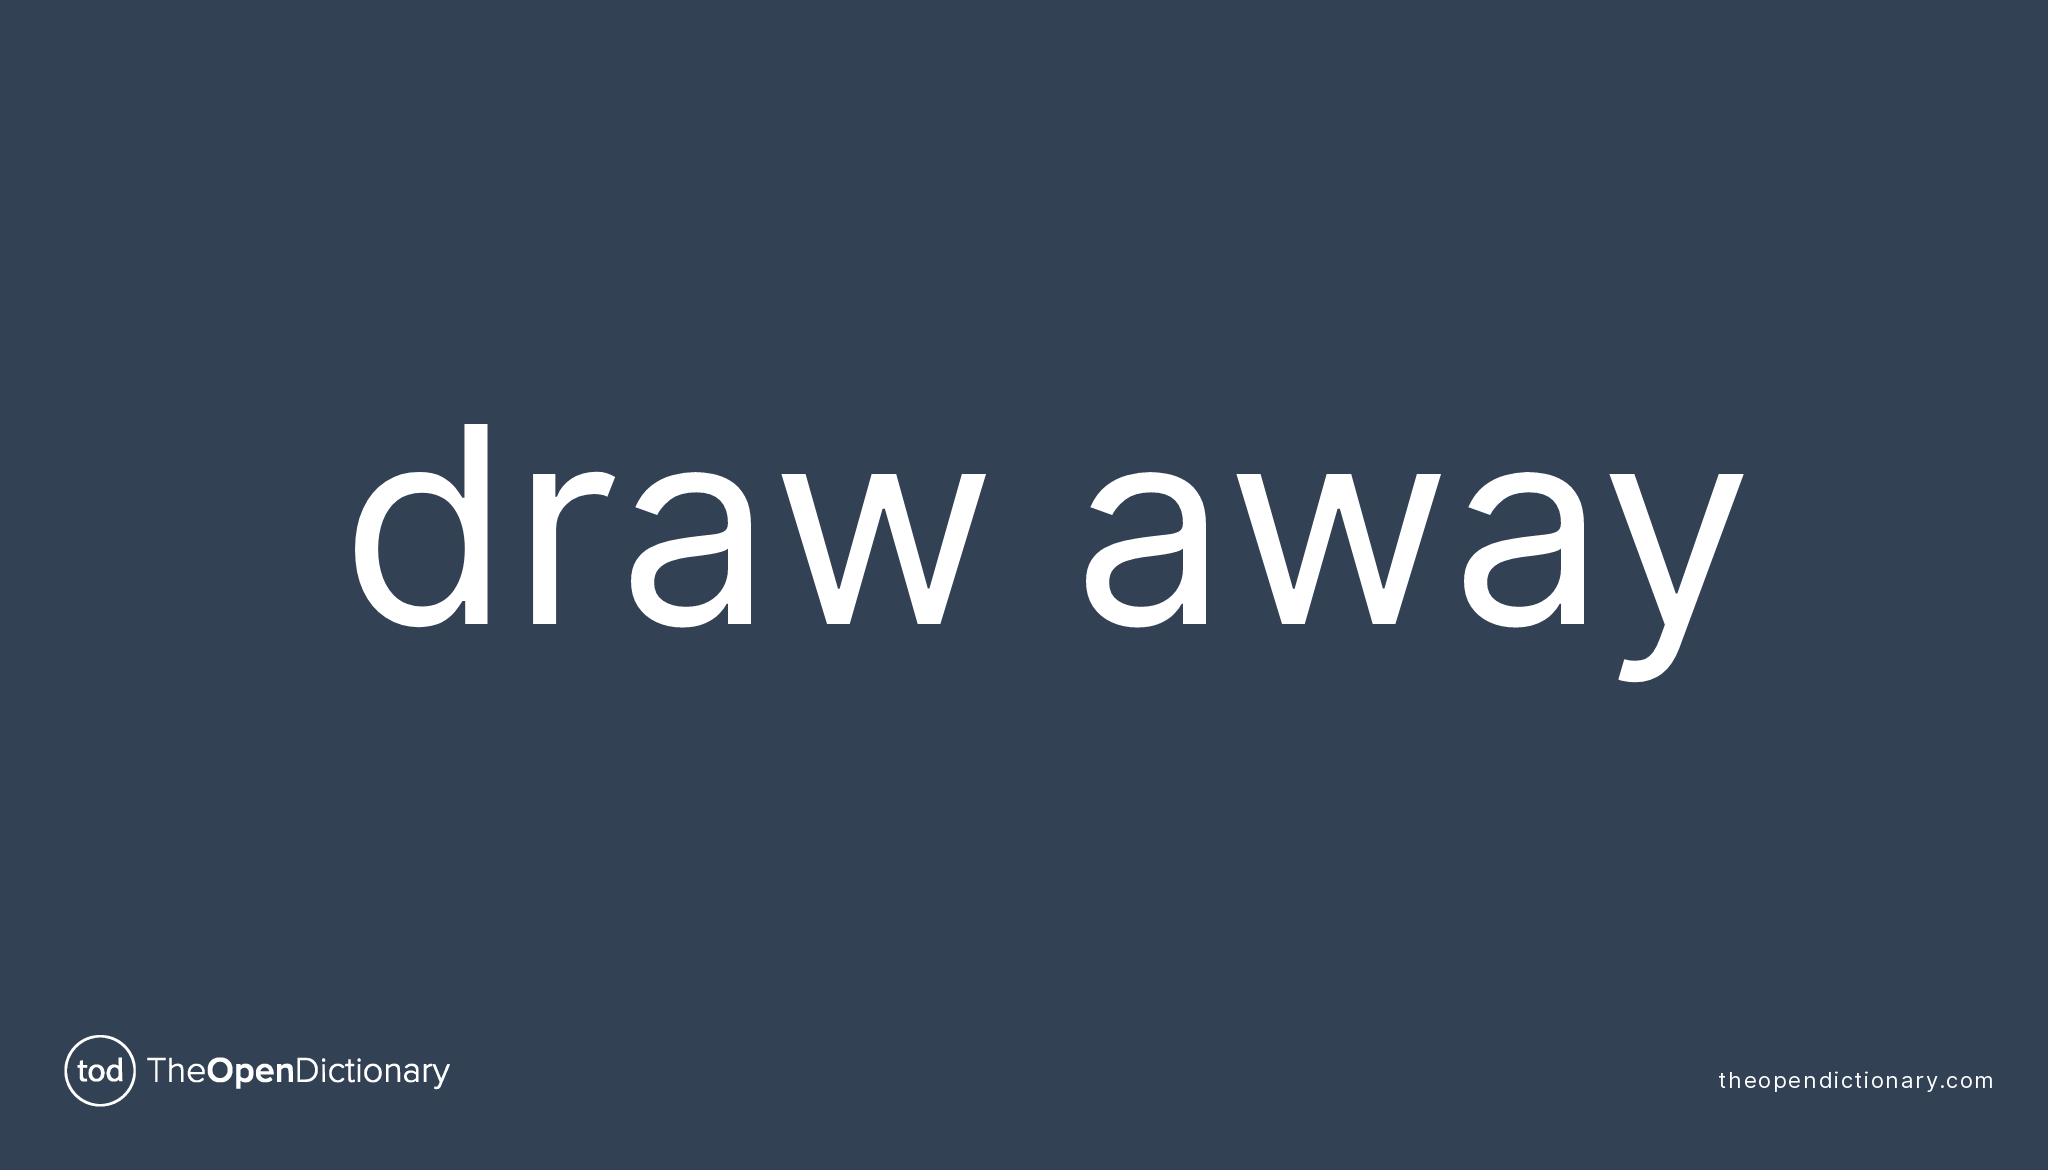 DRAW AWAY Phrasal Verb DRAW AWAY Definition, Meaning and Example